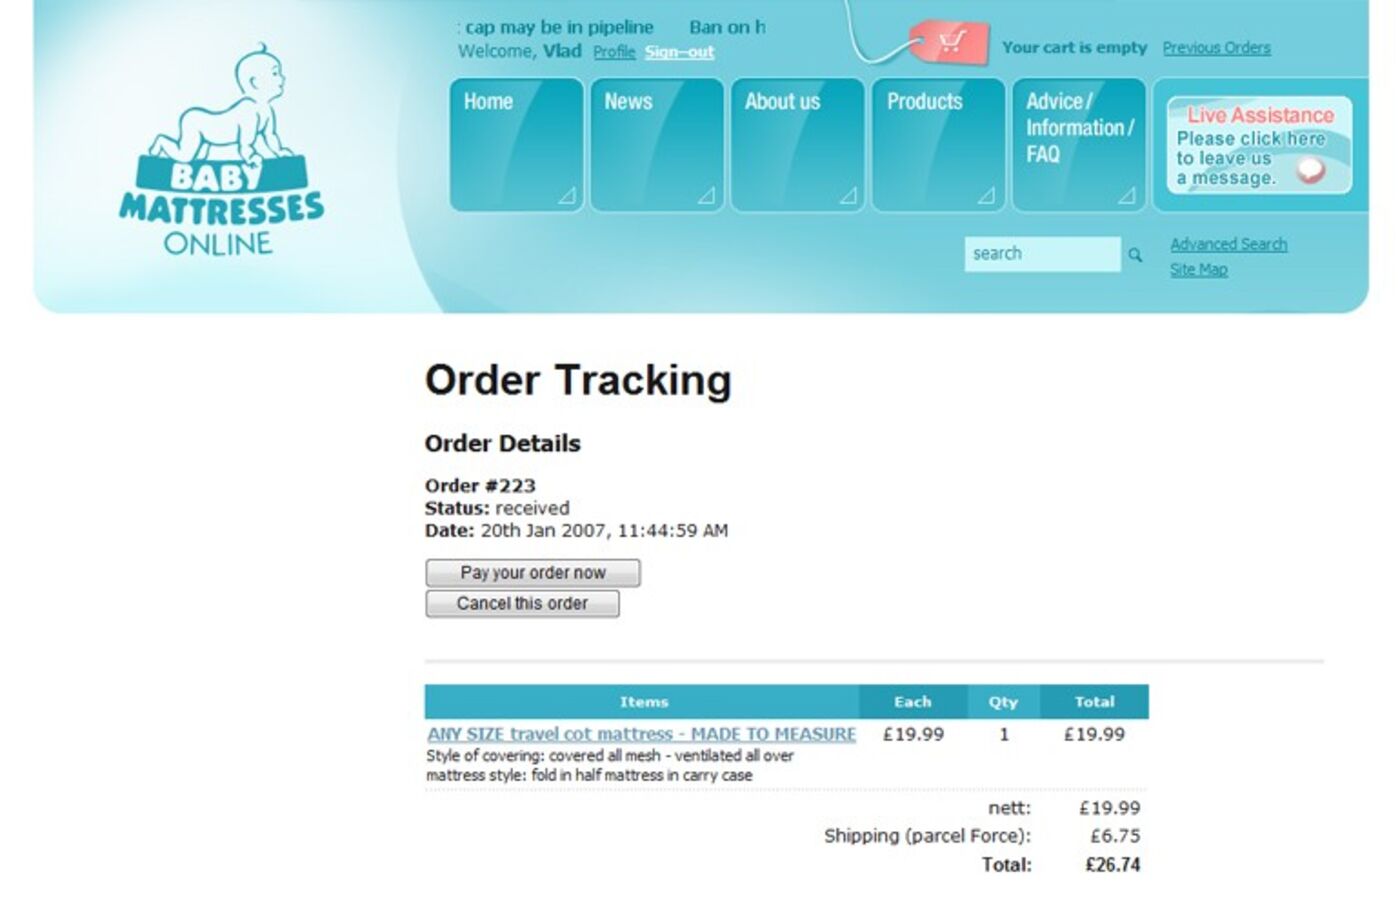 Baby Mattresses Online (2006) Order tracking